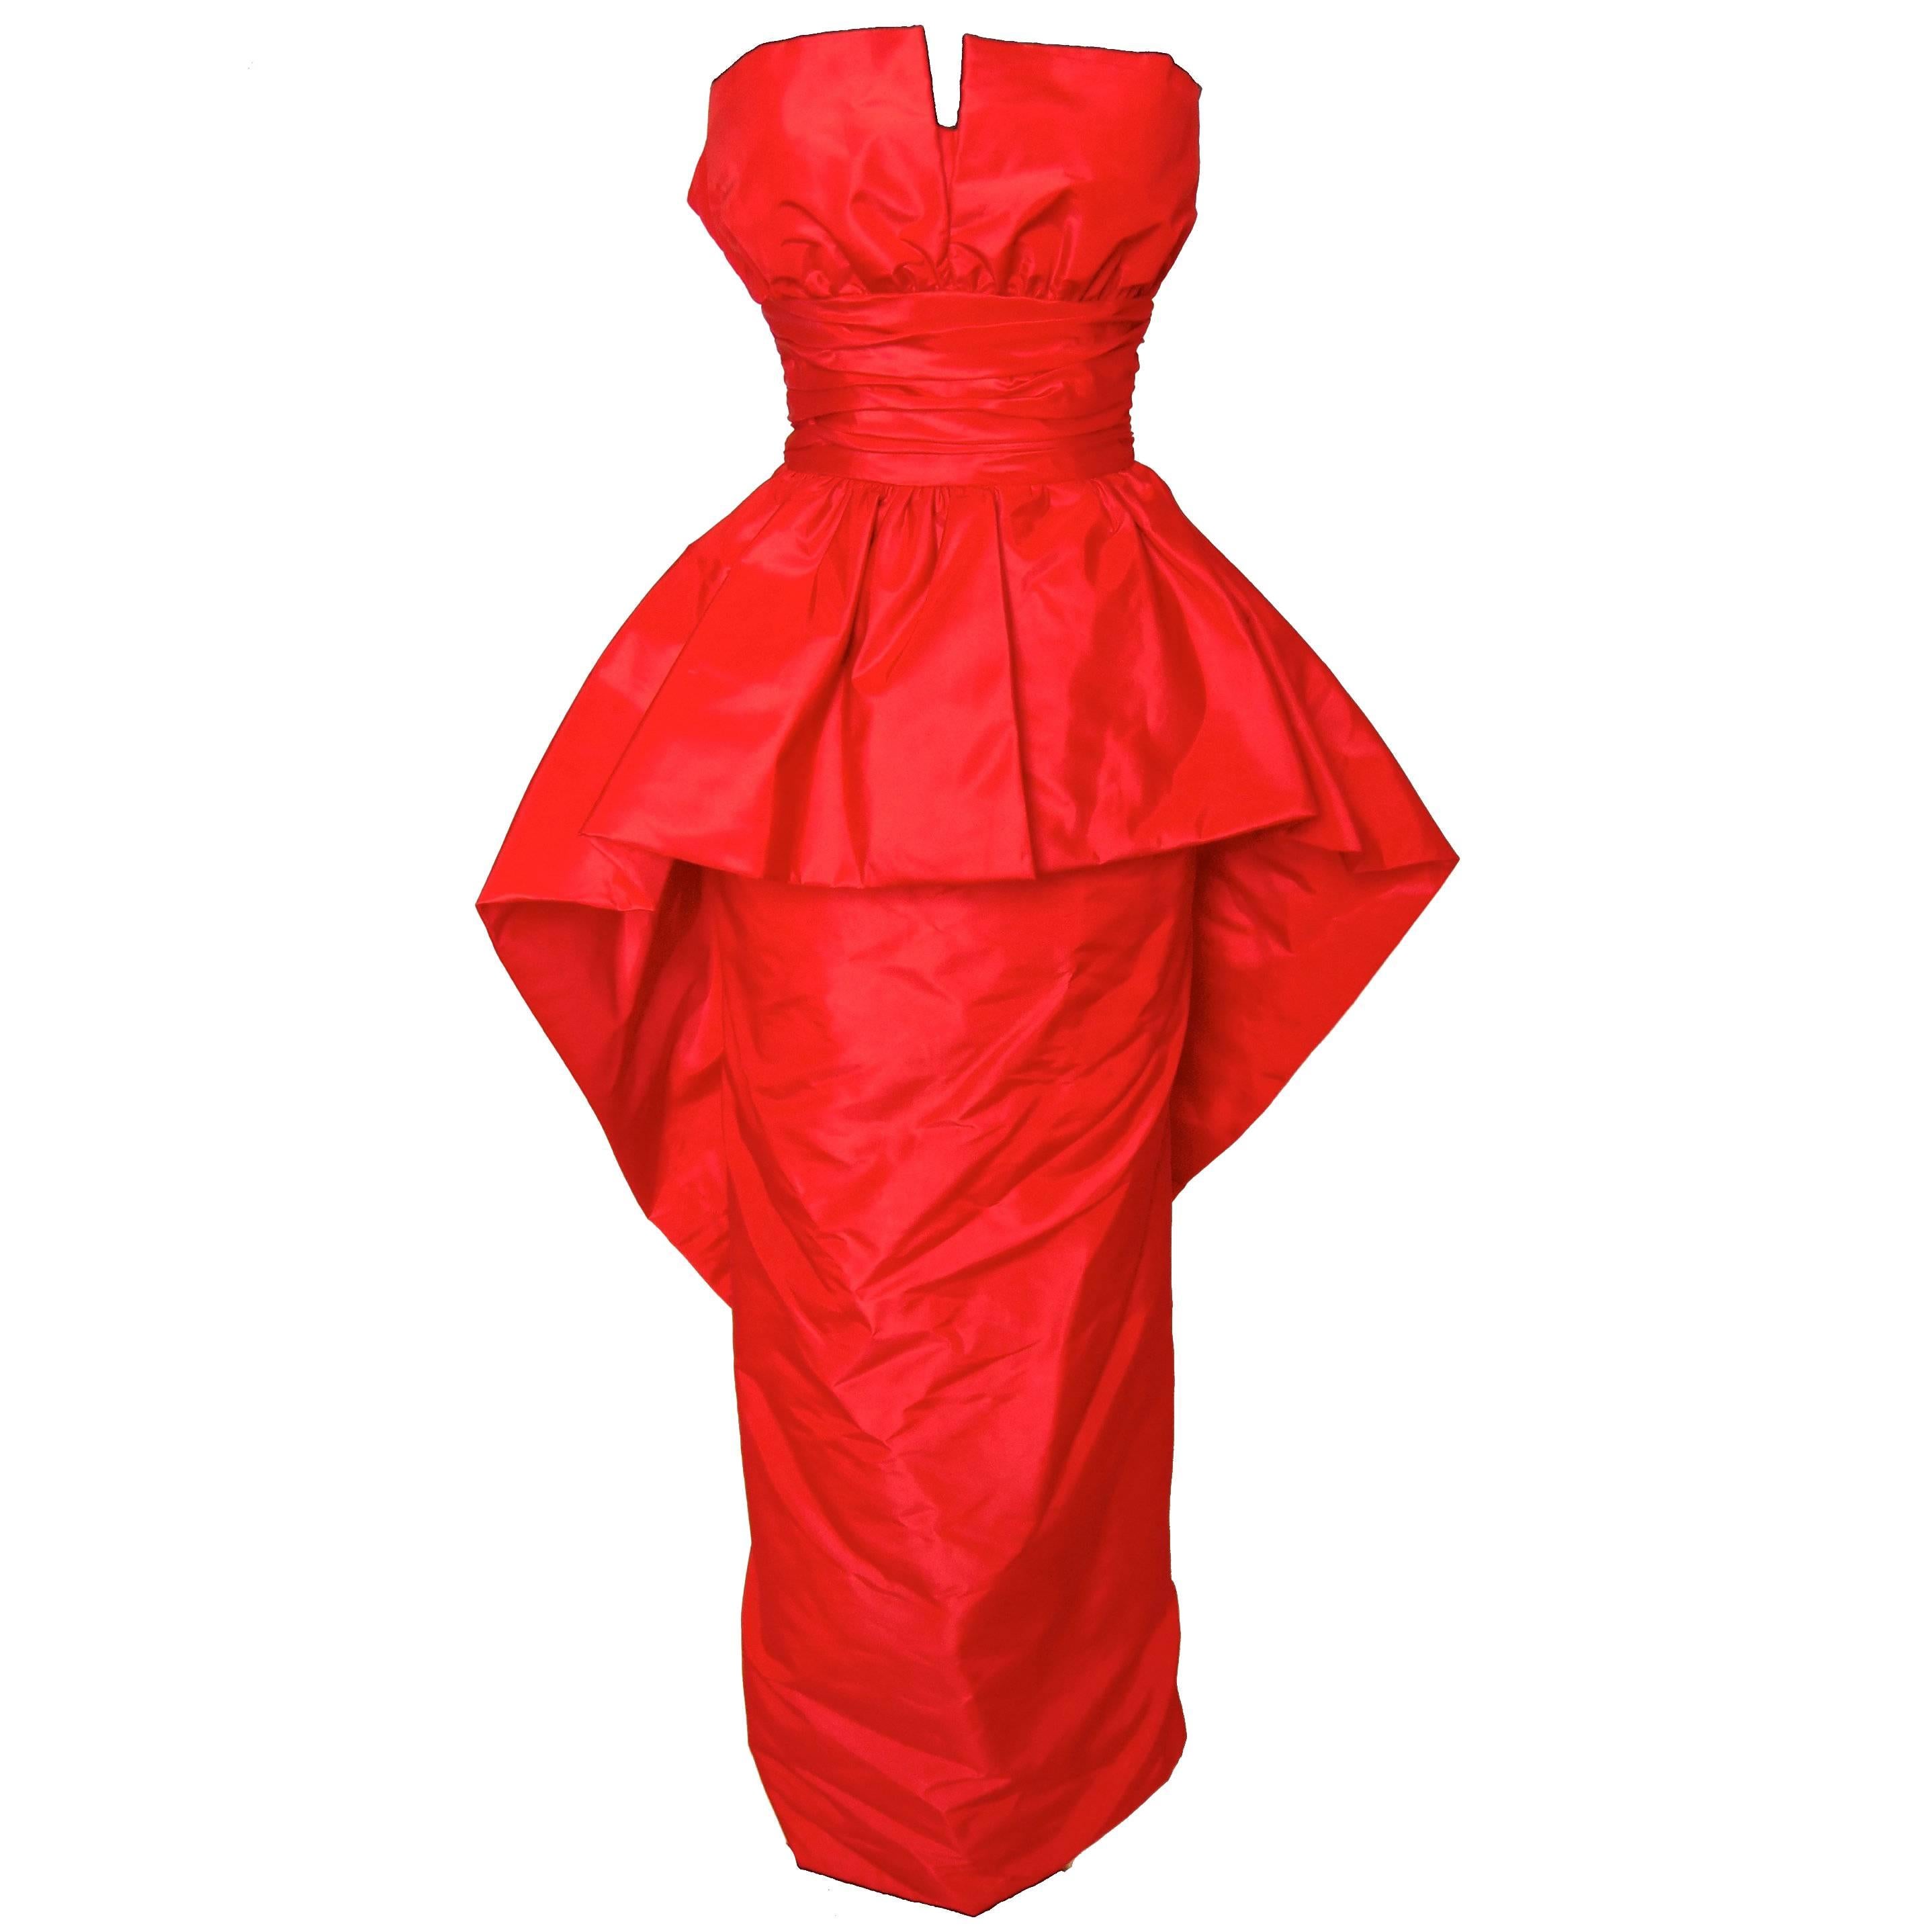 Victor Costa Bright Red Taffeta Evening Gown Strapless Sheath 1970s Size XS